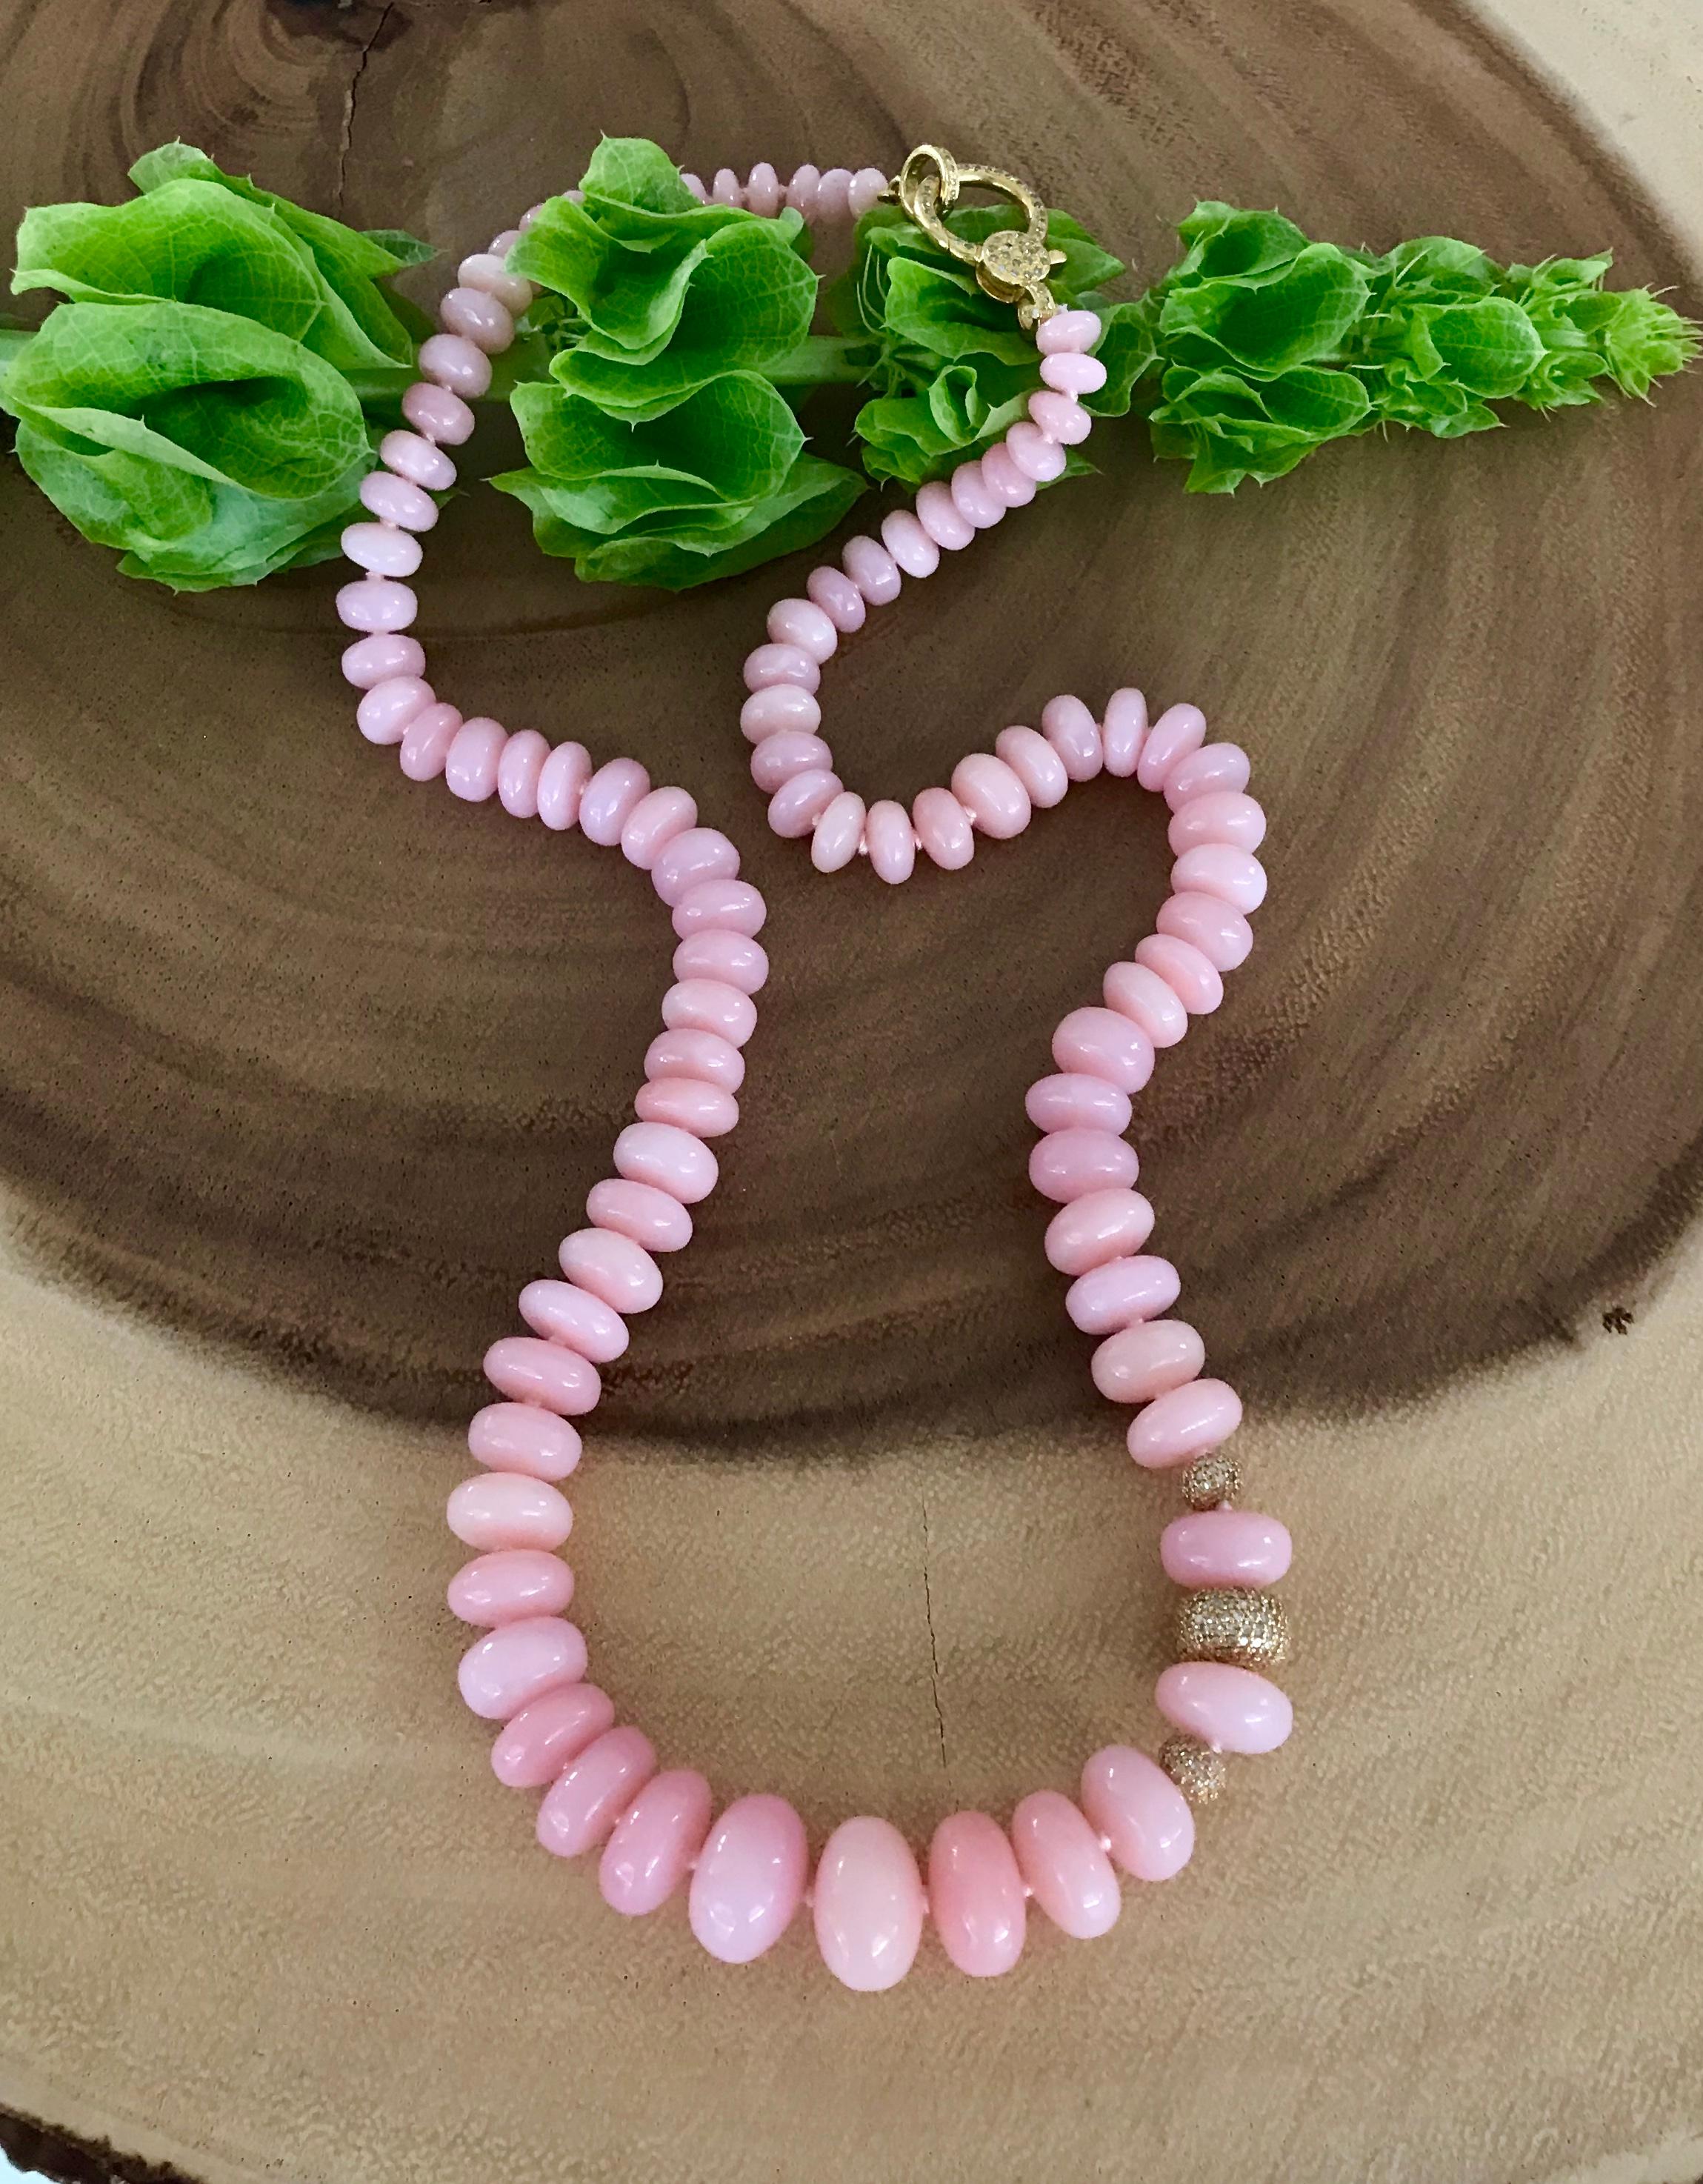 This stunning one-of-a-kind Joon Han pink opal bead necklace with diamond doughnut enhancers and a diamond clasp brings a touch of beauty and sophisticated refinement to all styles. Handcrafted in 14K yellow gold, this gorgeous bead necklace is the